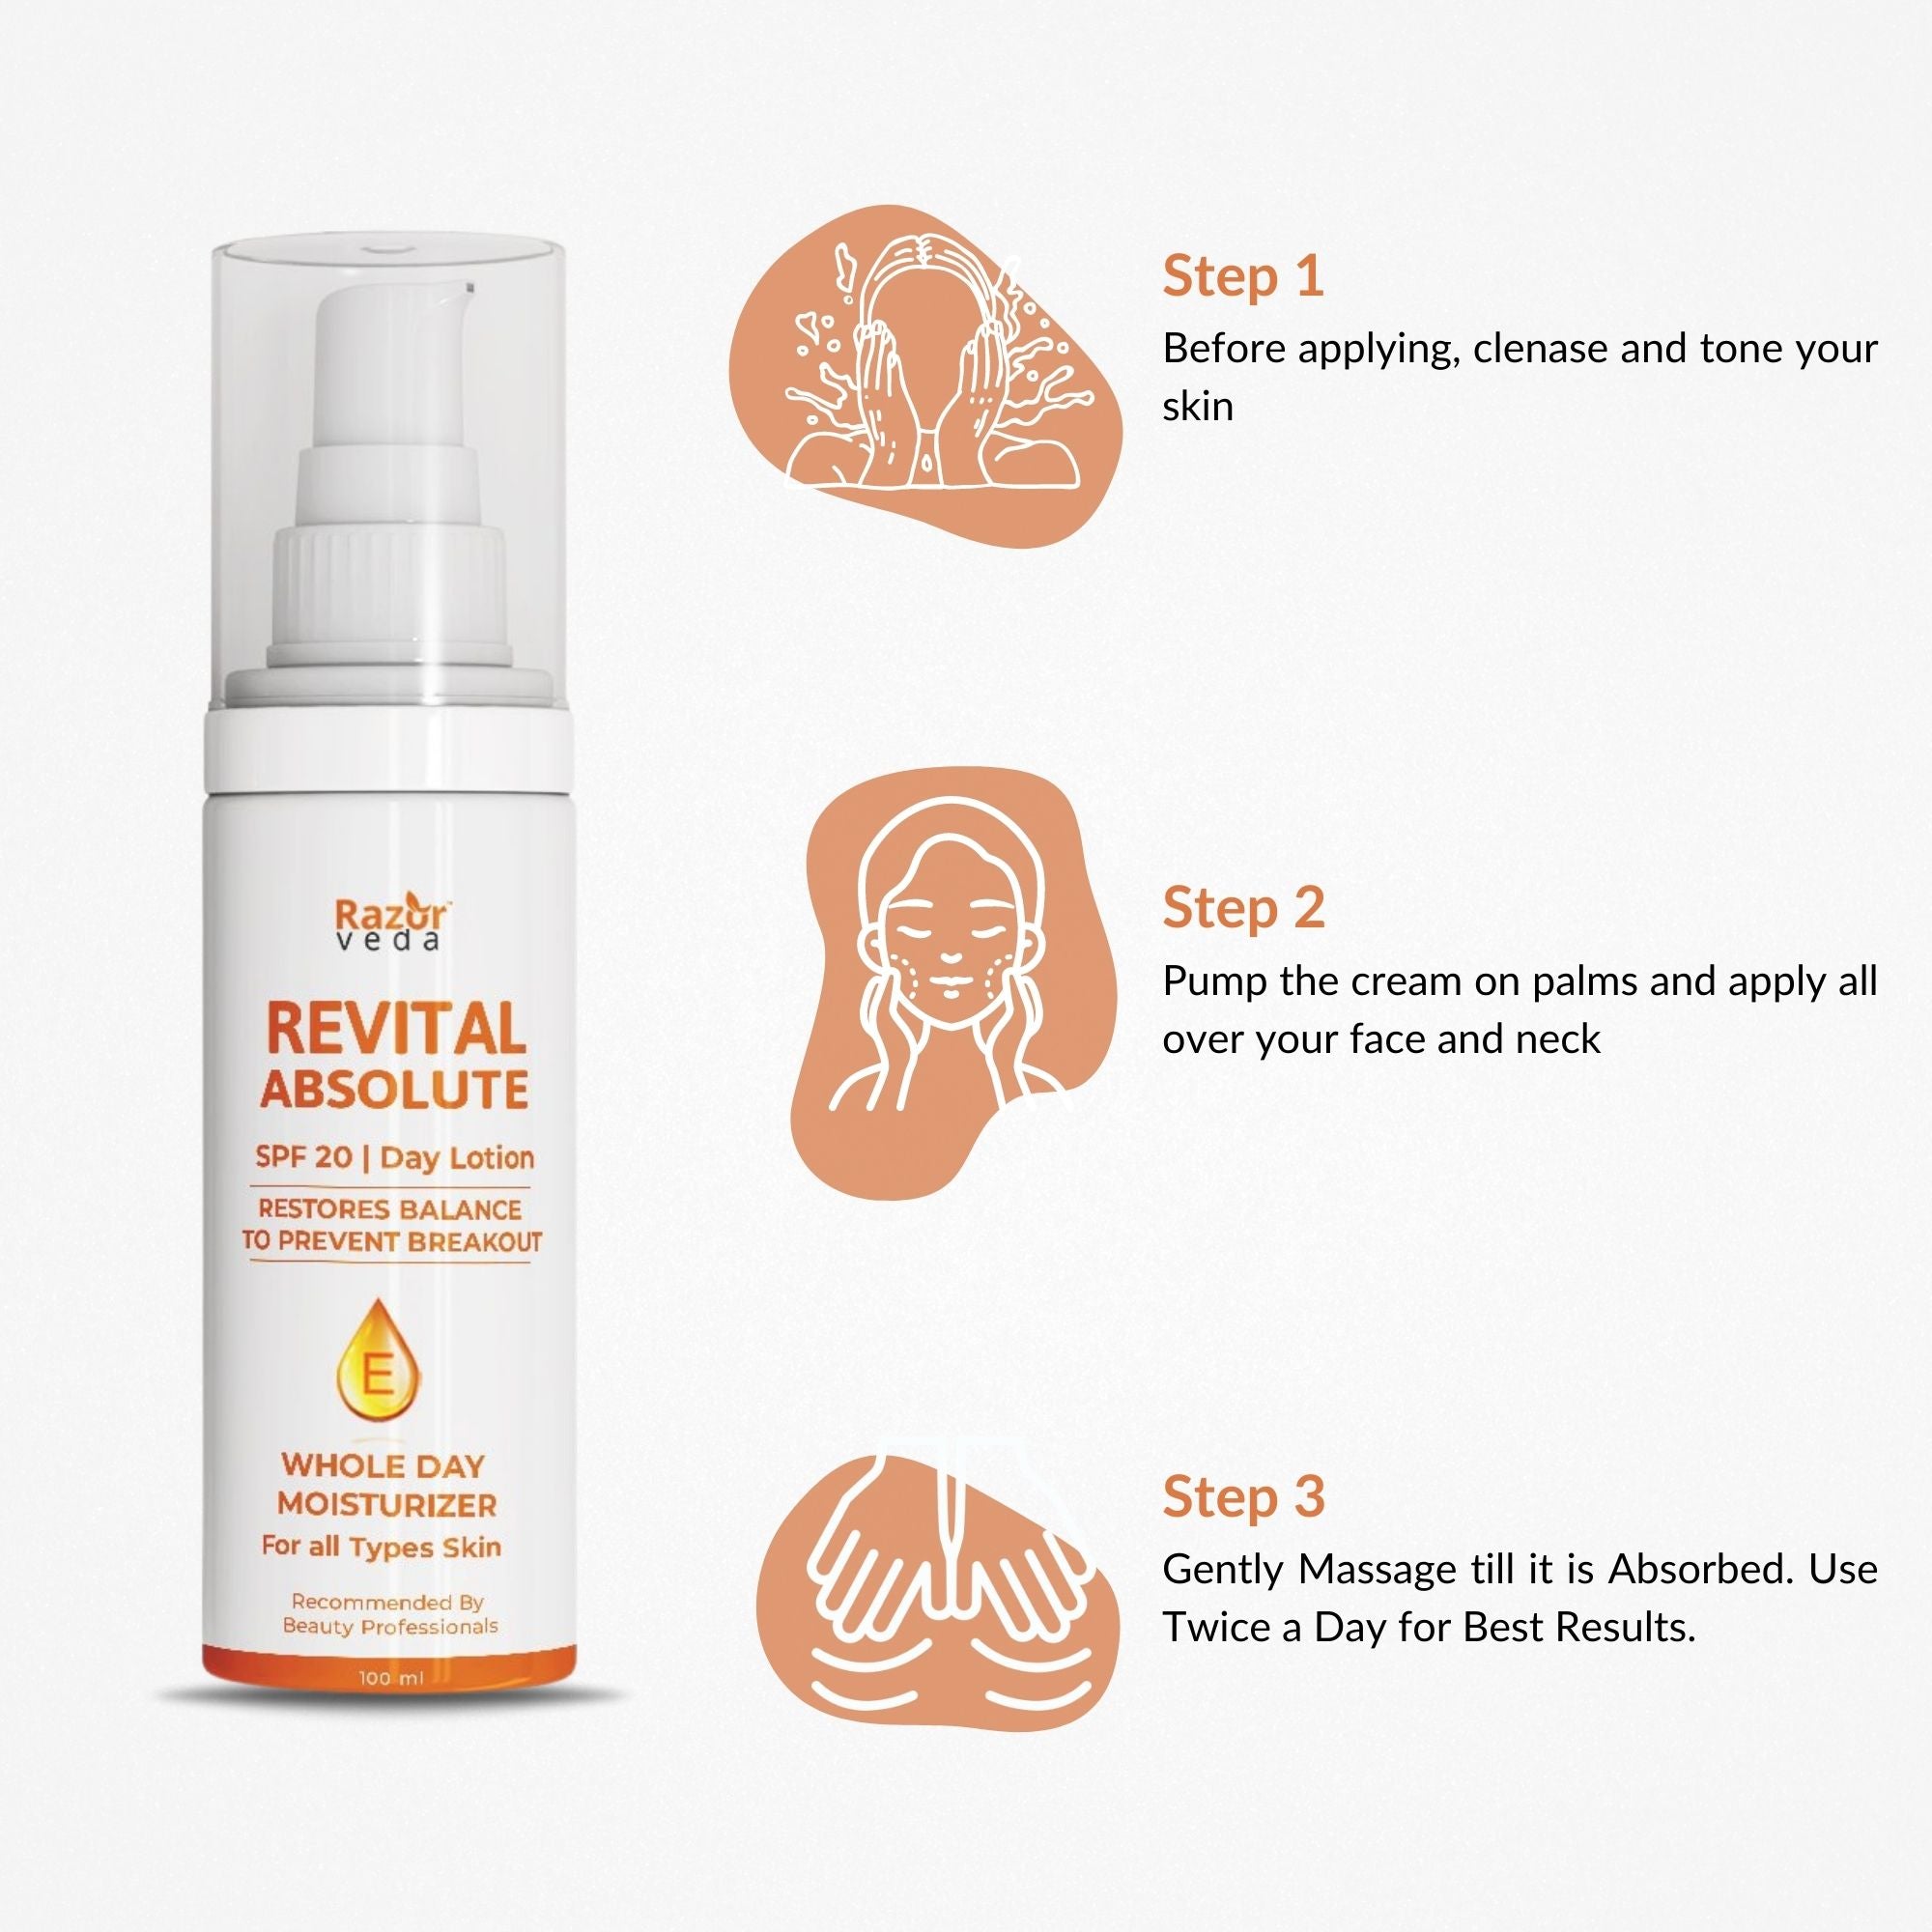 REVITAL ABSOLUTE Clear Moisturizer with SPF 20 for Whole Day Moisturization & Healthy Skin Razorveda